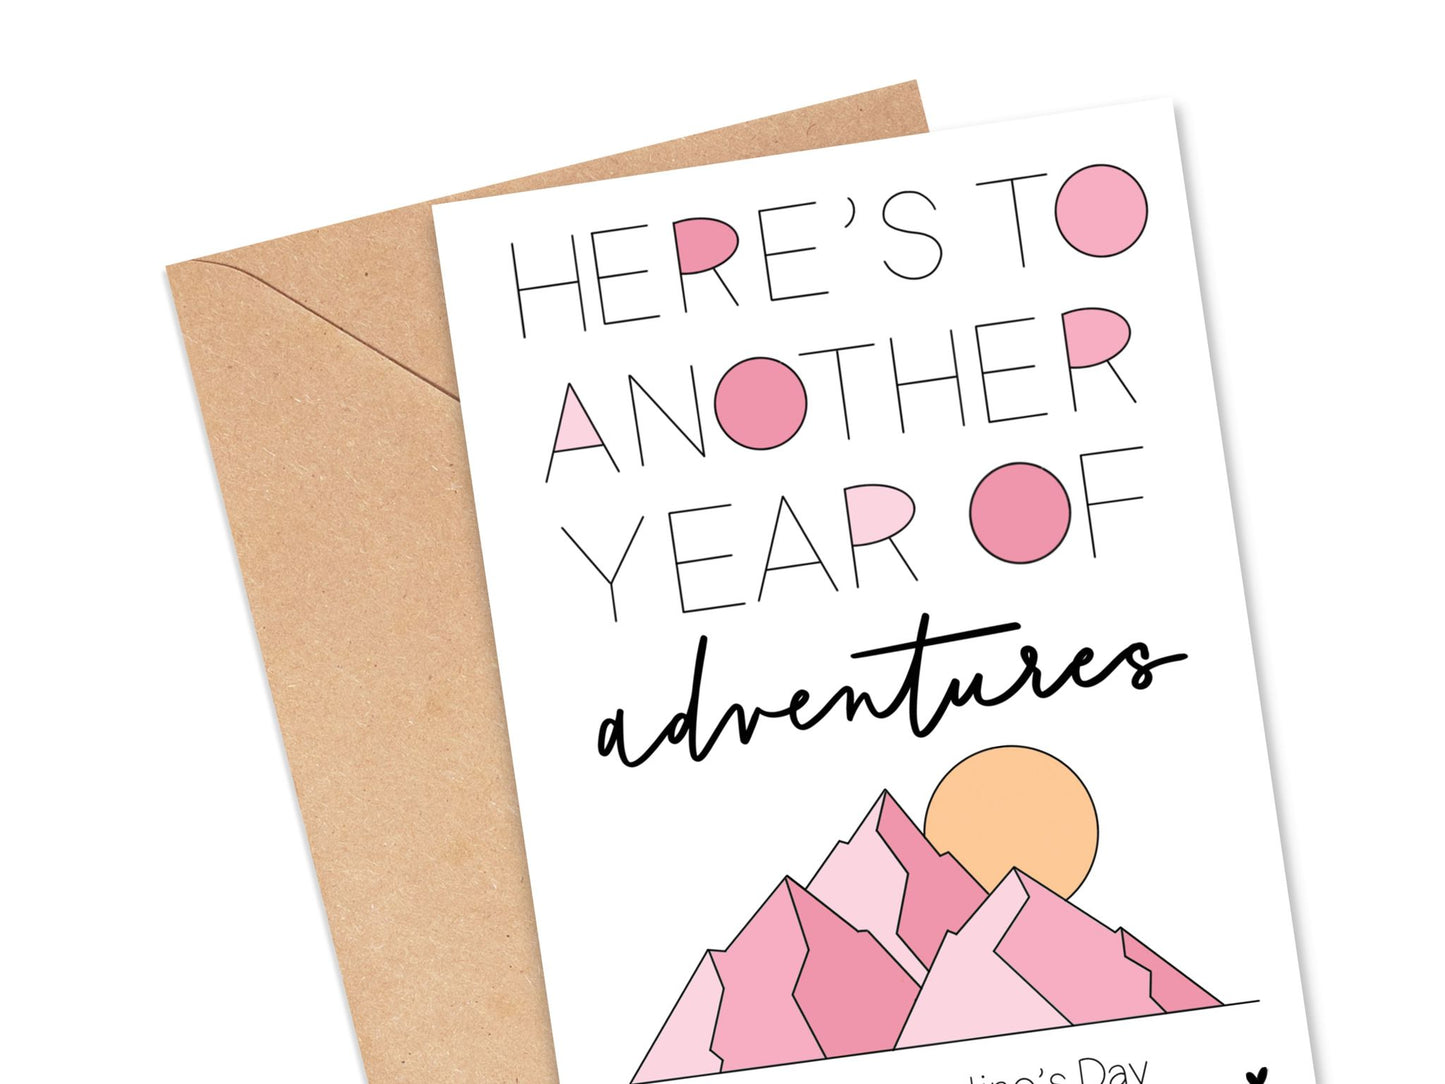 Here's to Another Year of Adventures Valentine's Day Card Simply Happy Cards